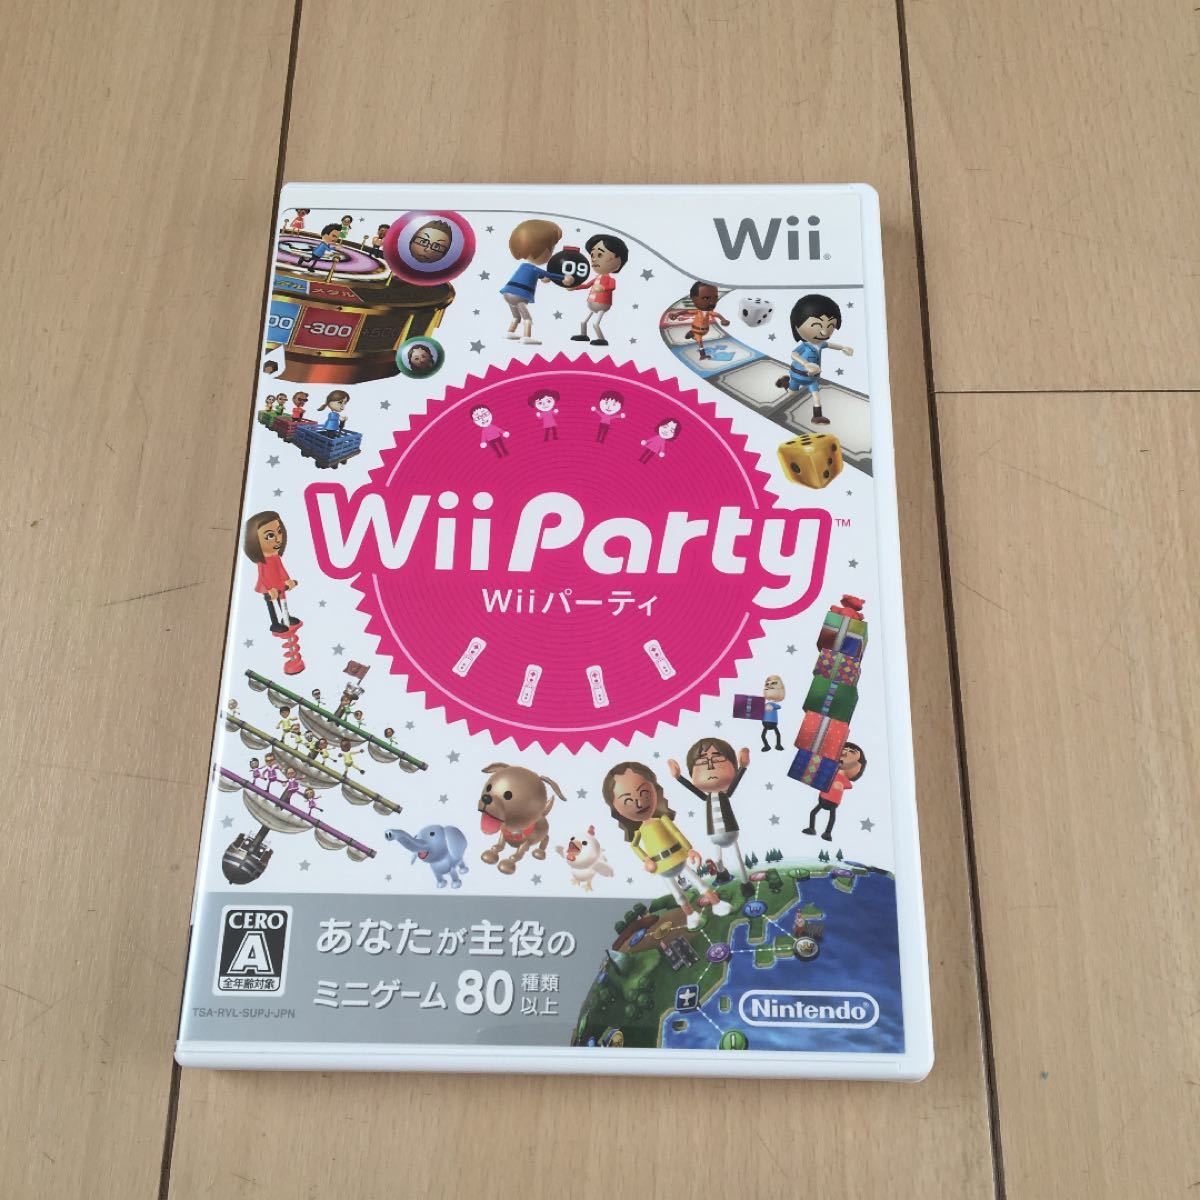 Wiiパーティ Wii Party